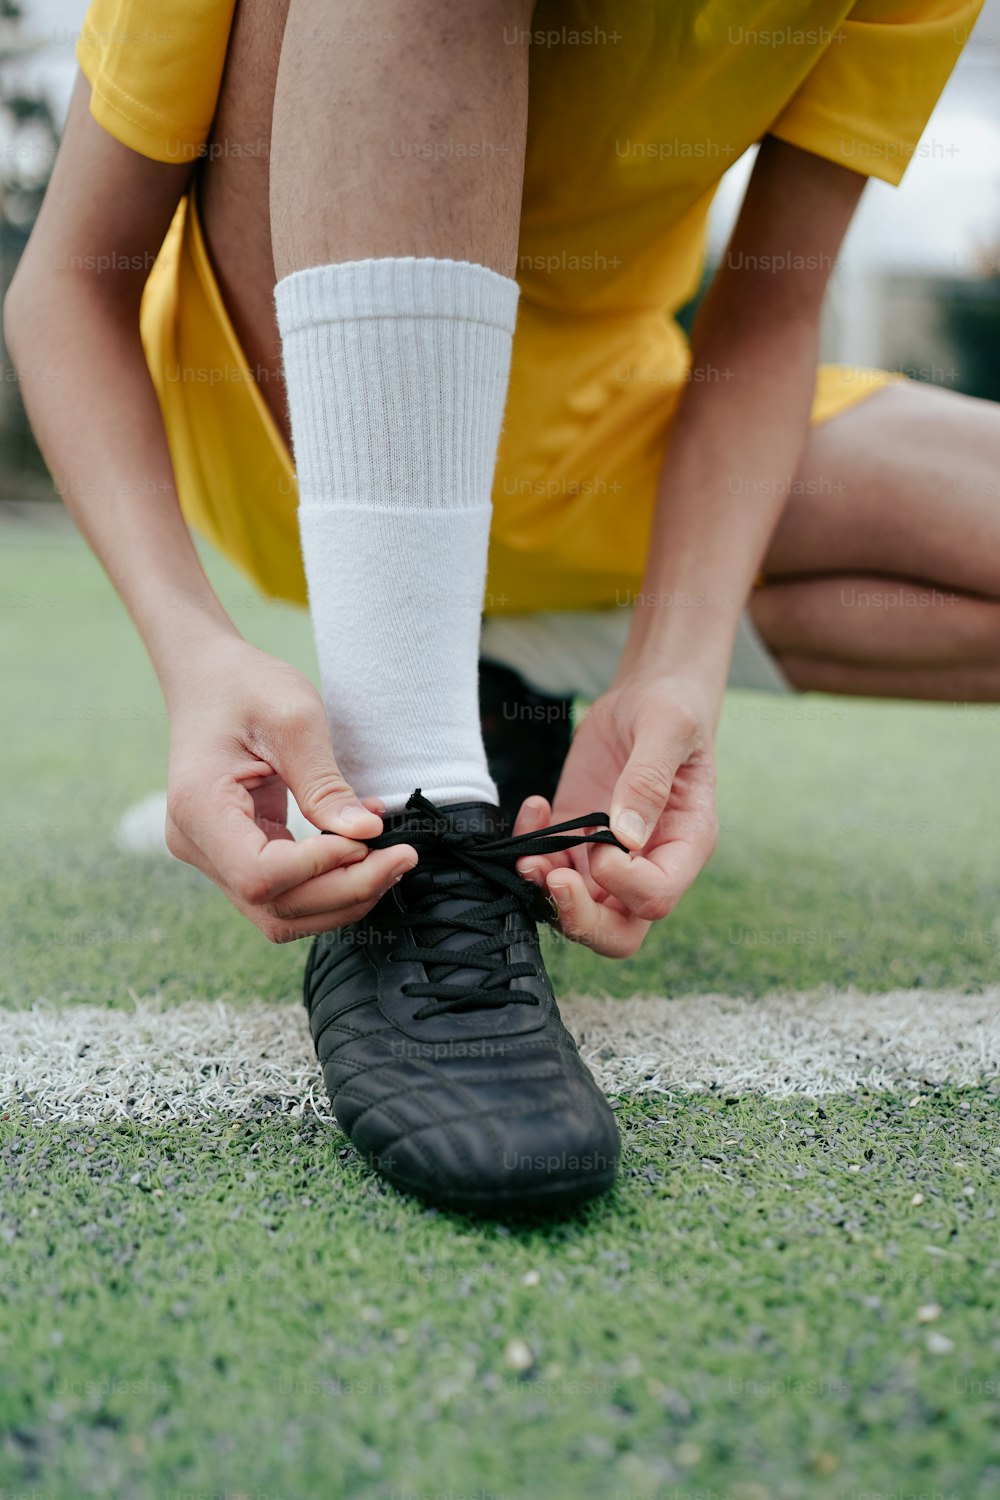 a person tying a shoelace on a soccer field